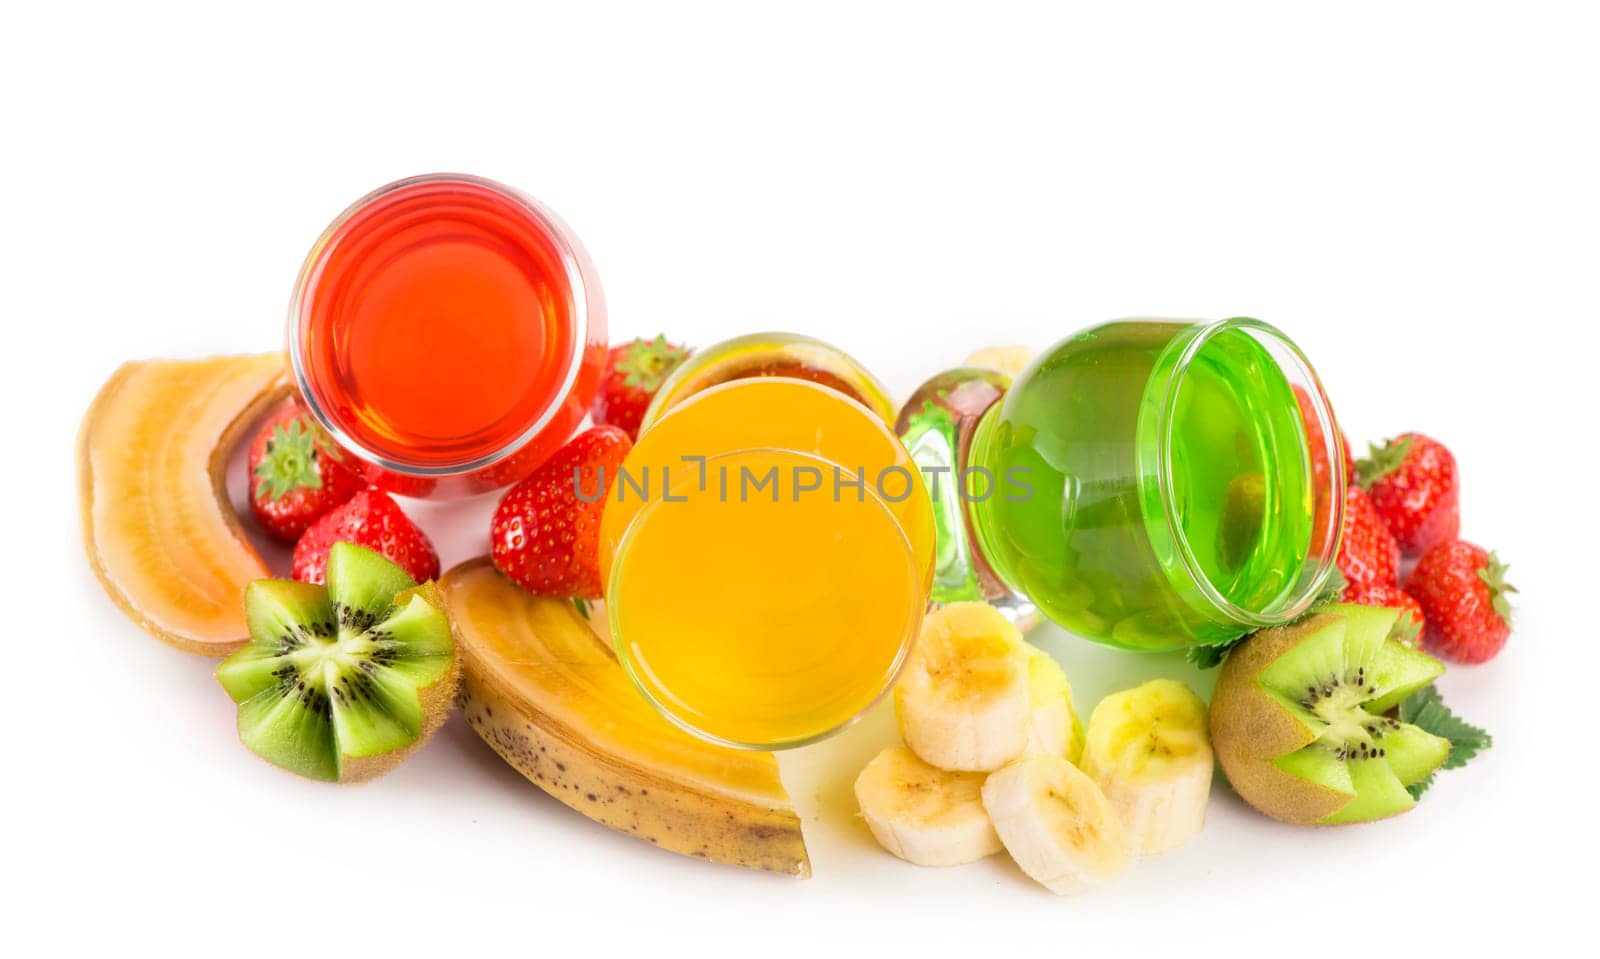 banana , kiwi and strawberry jelly in glasses with fresh berries and fruits on a white background by aprilphoto